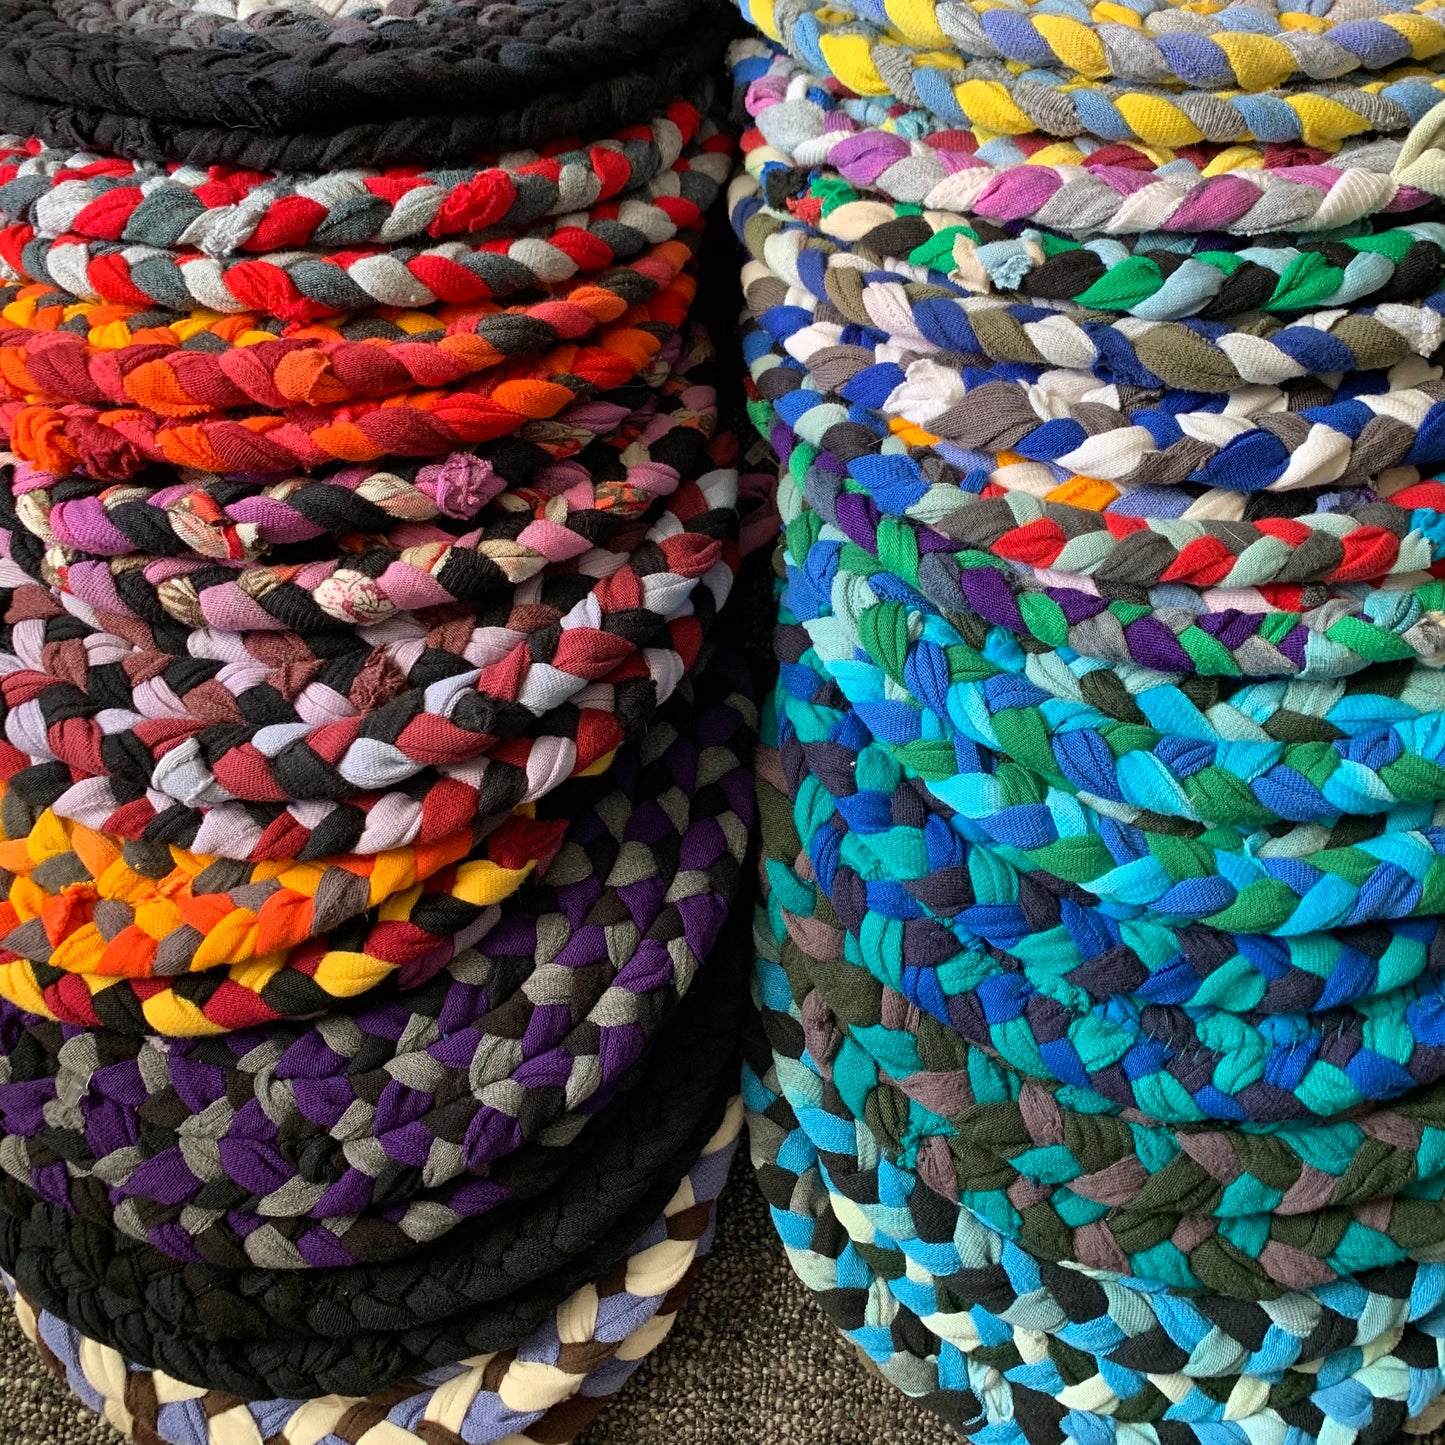 All of the trivet potholders, in a spectrum of colors, lay flat in two rows.